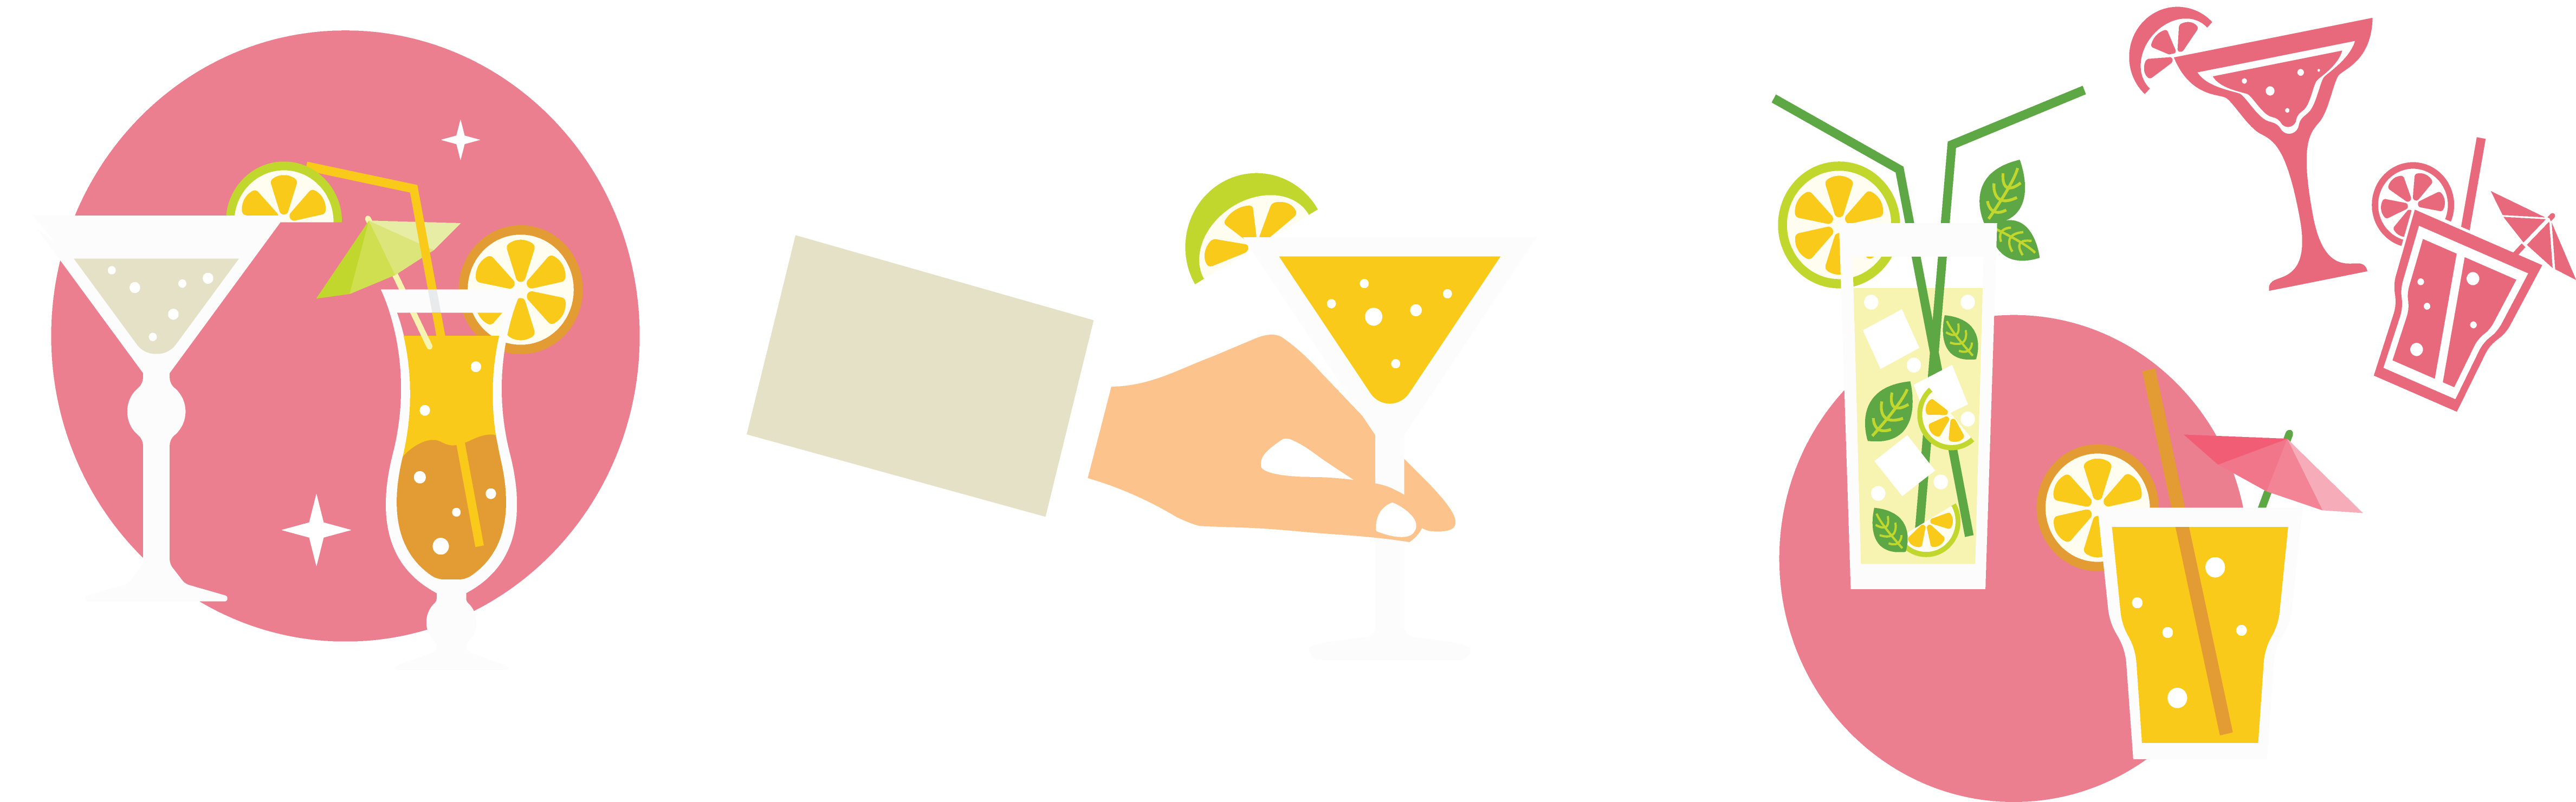 party clipart cocktail party